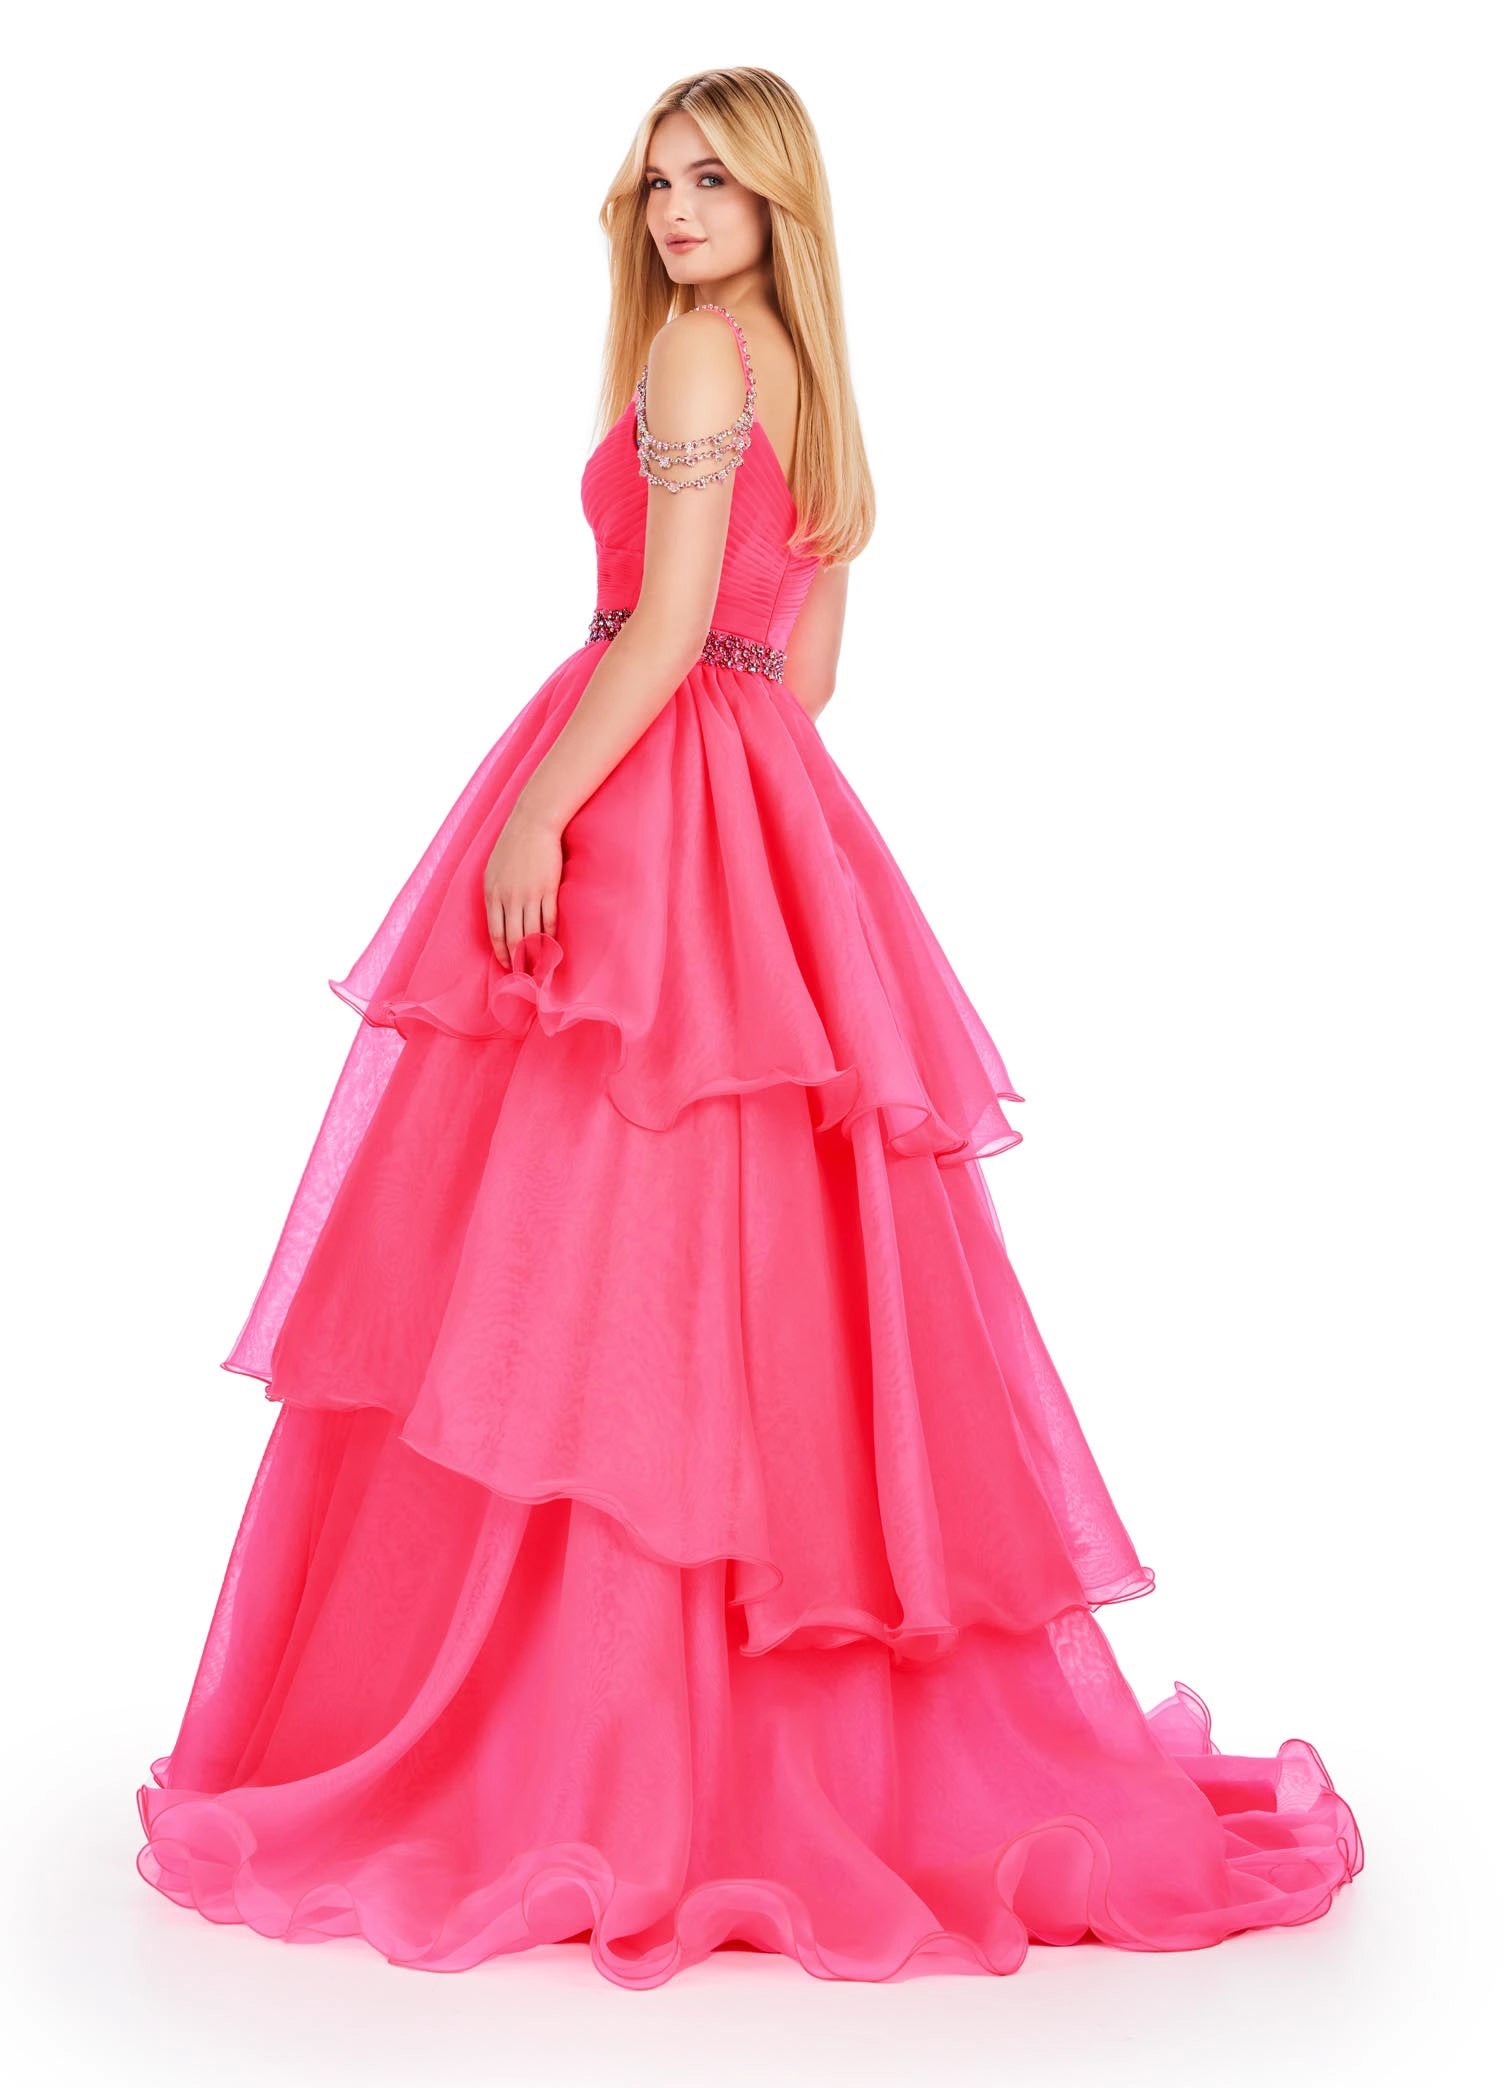 The Ashley Lauren 11561 is the perfect formal dress for prom, pageants, and galas. Featuring off-the-shoulder straps, a crystal embellished bodice, and tiered organza long layer skirt, this gown will ensure you make a statement. Enjoy a comfortable and stylish night in this elegant gown. 